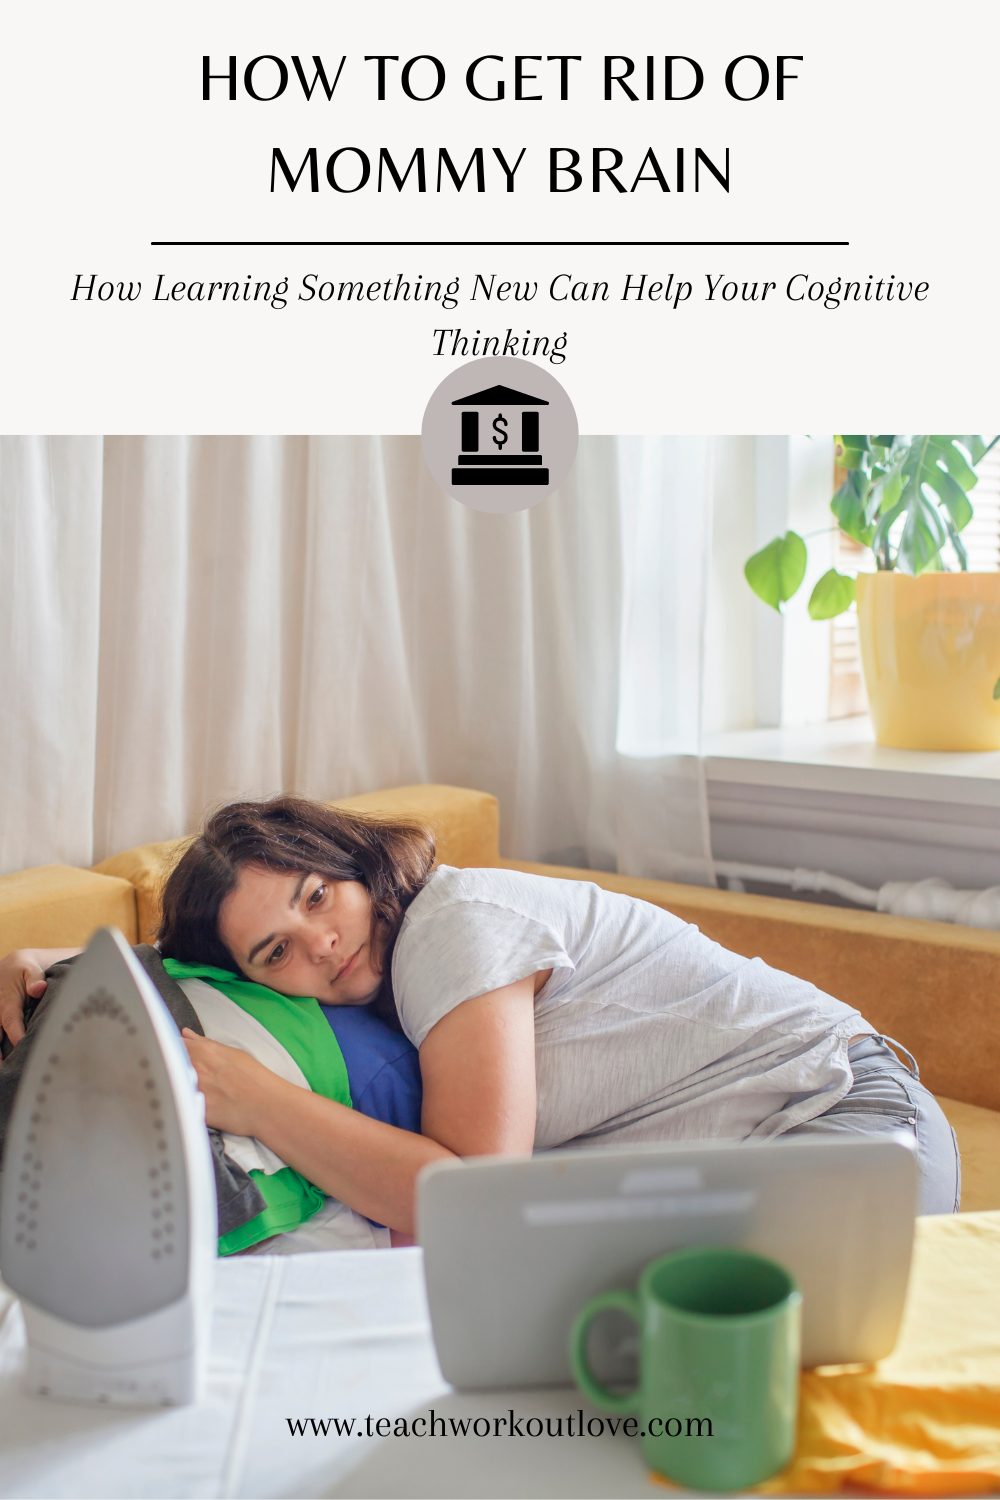 If mommy brain is affecting your daily life, it’s important to realize that you don’t just have to accept it. There are ways to improve your cognitive thinking — like learning something new.